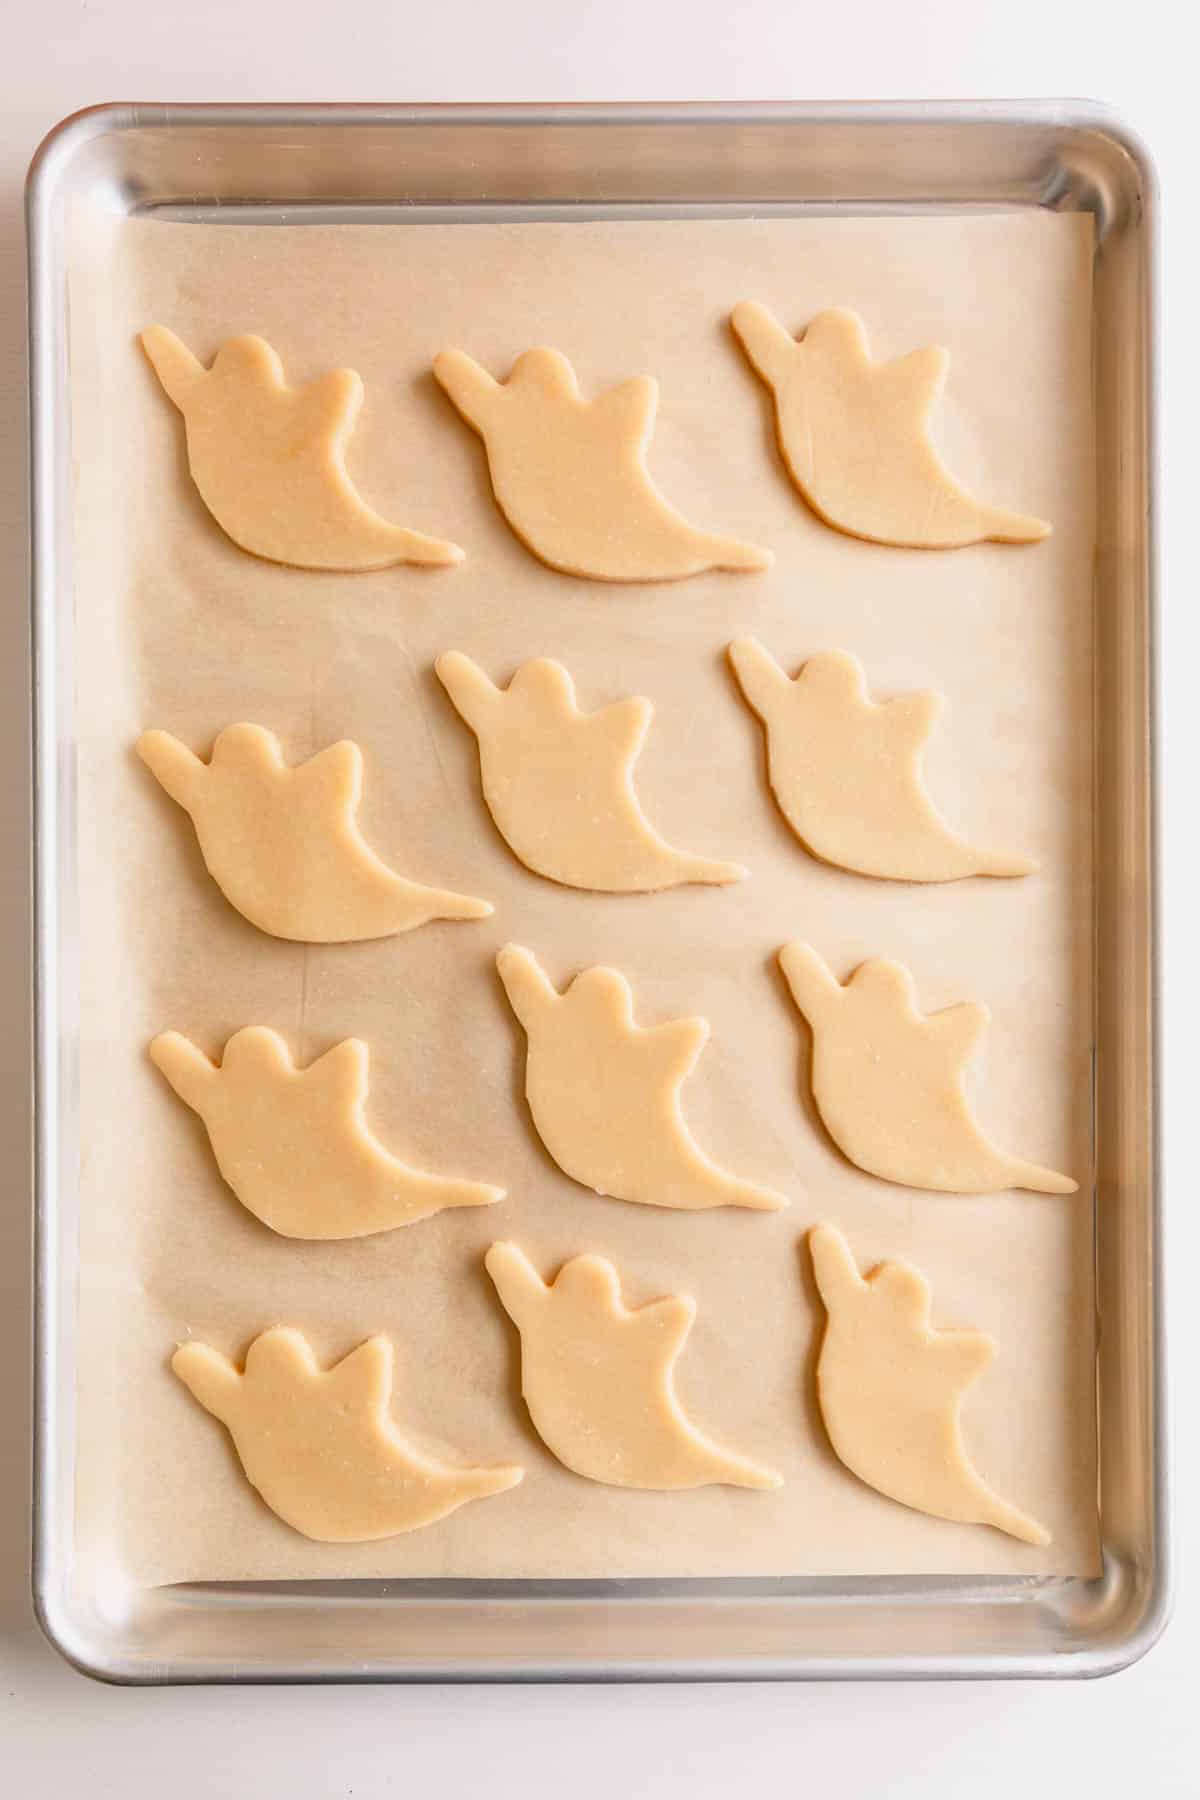 Unbaked ghost cutout cookies on a baking sheet.